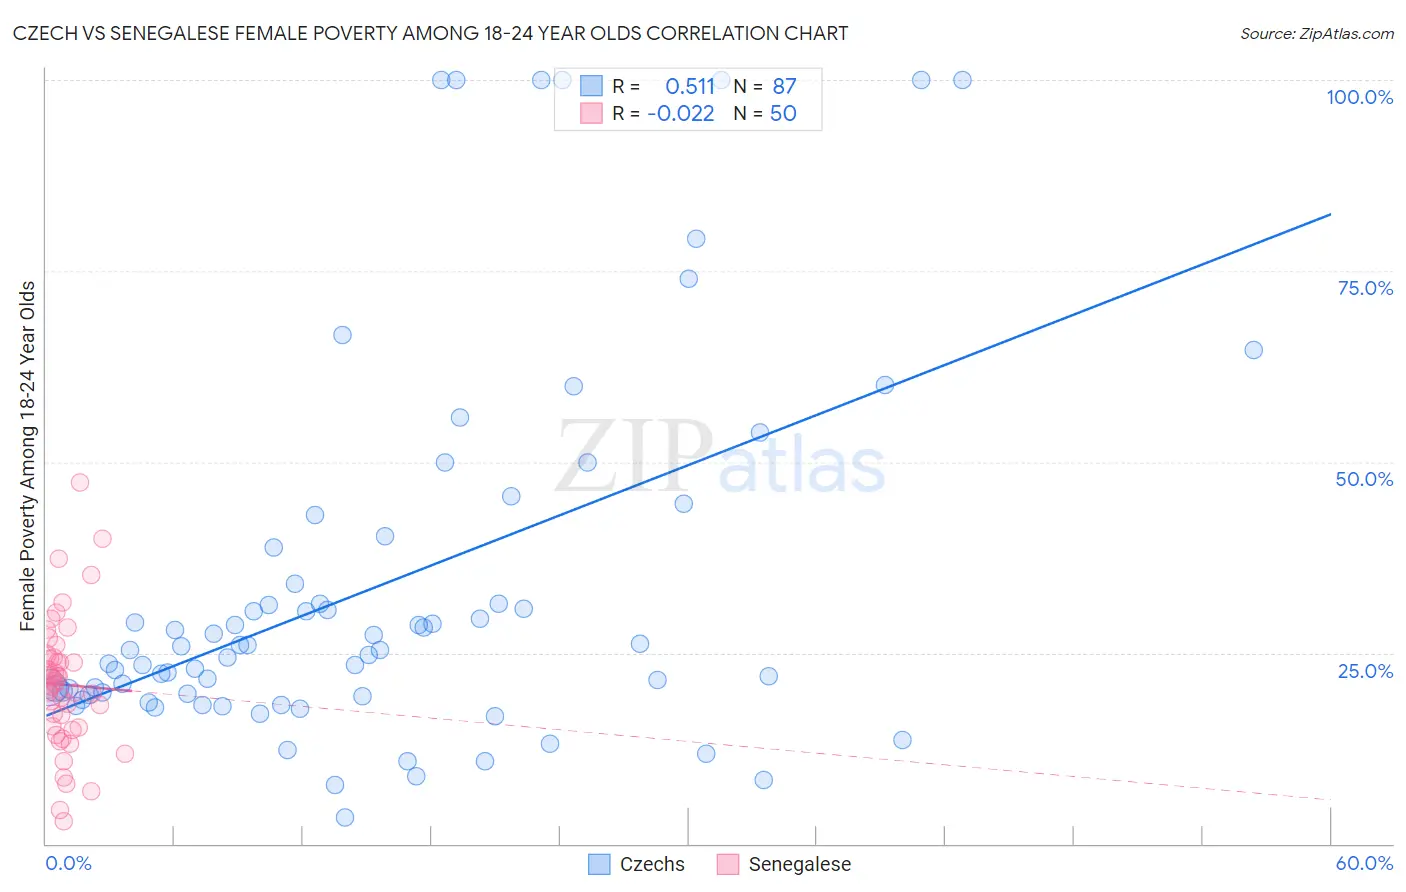 Czech vs Senegalese Female Poverty Among 18-24 Year Olds